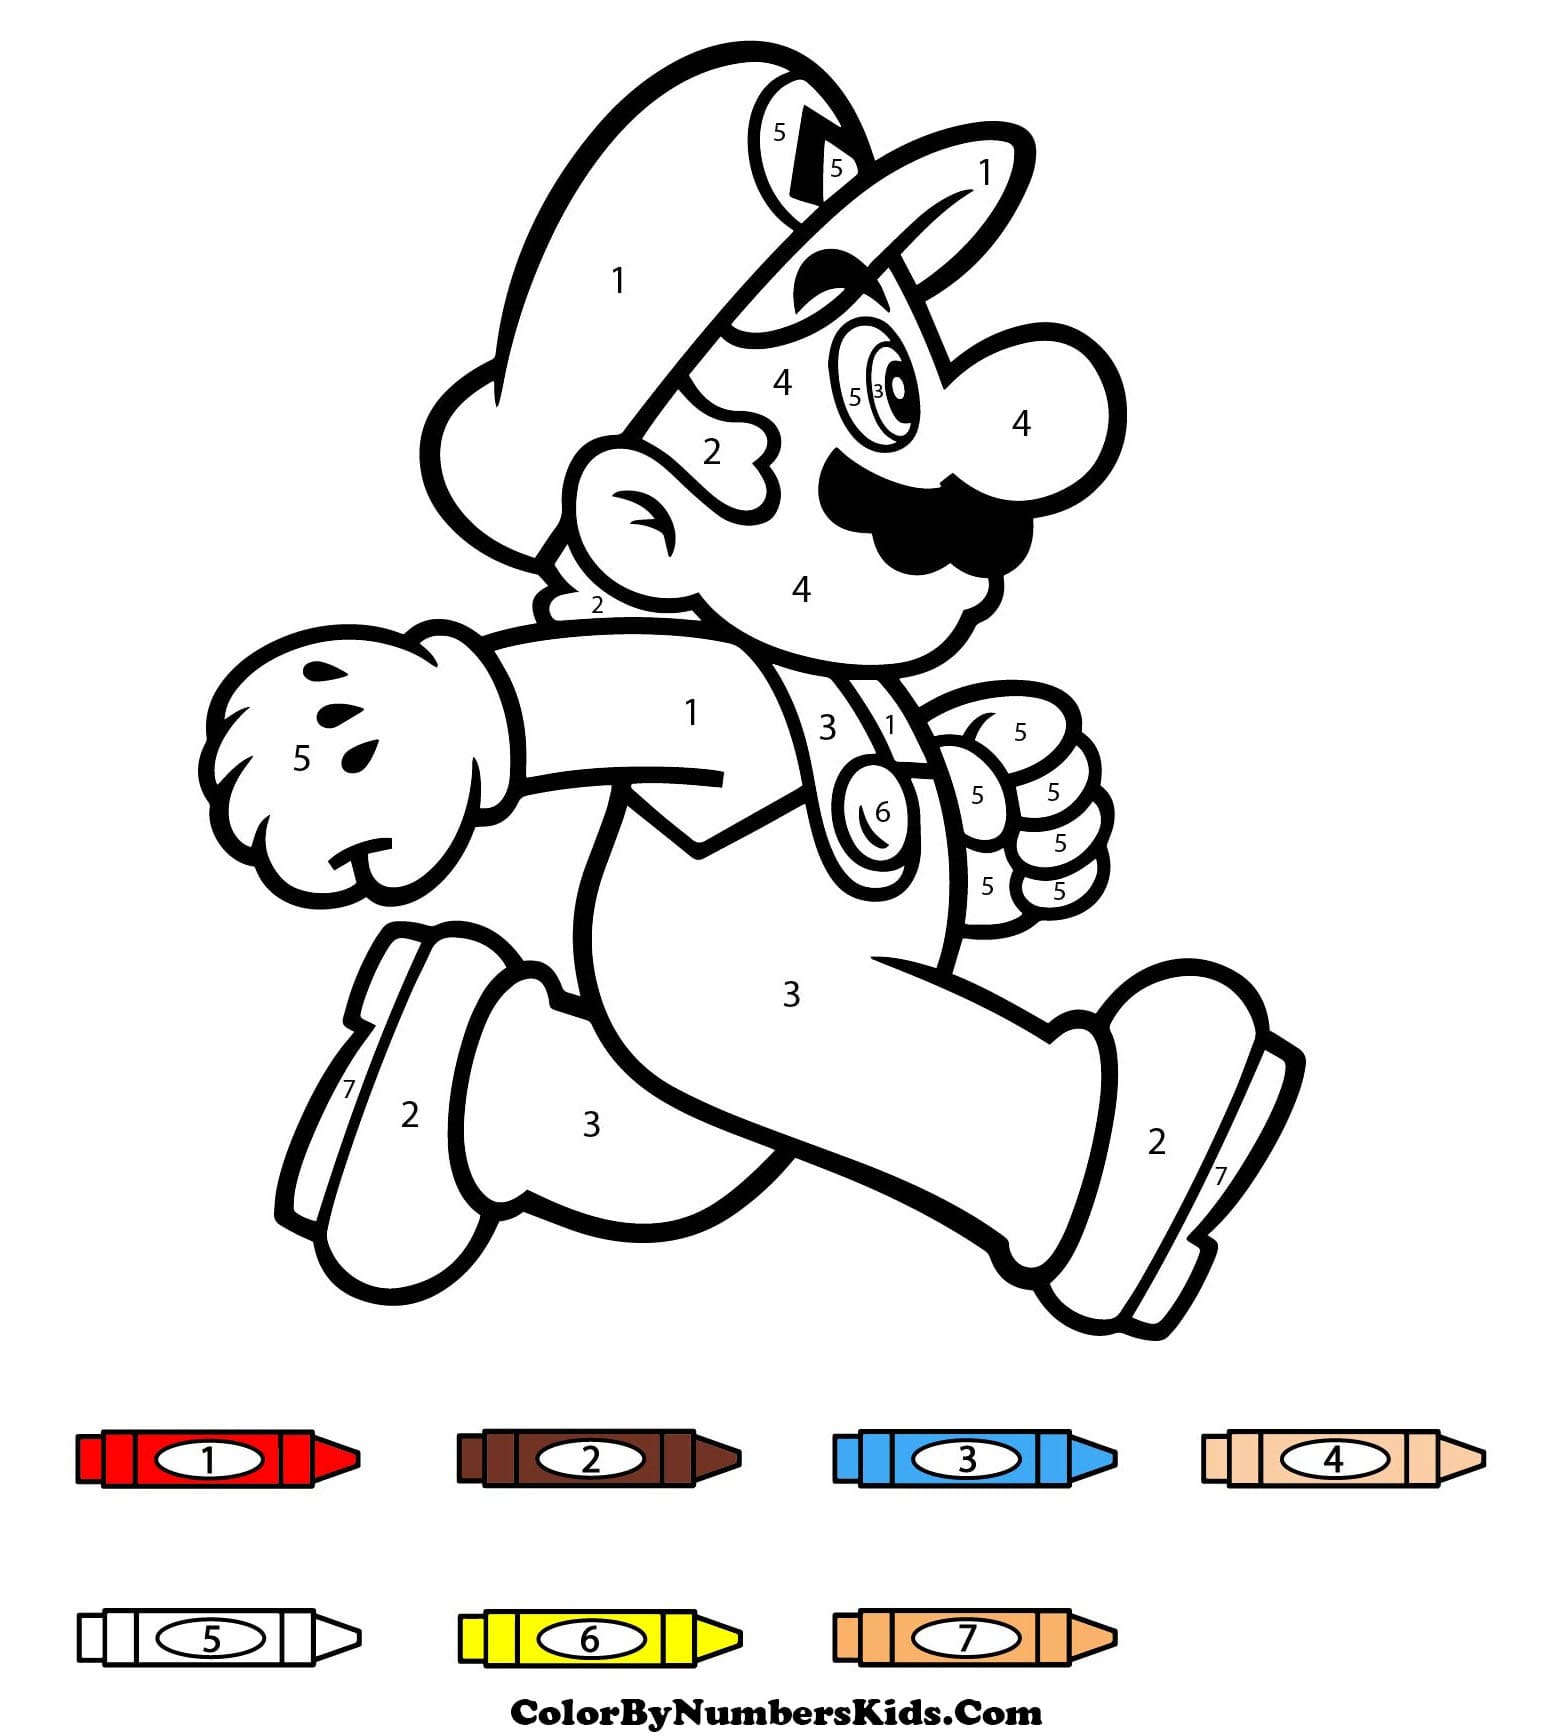 Running Mario Color By Number